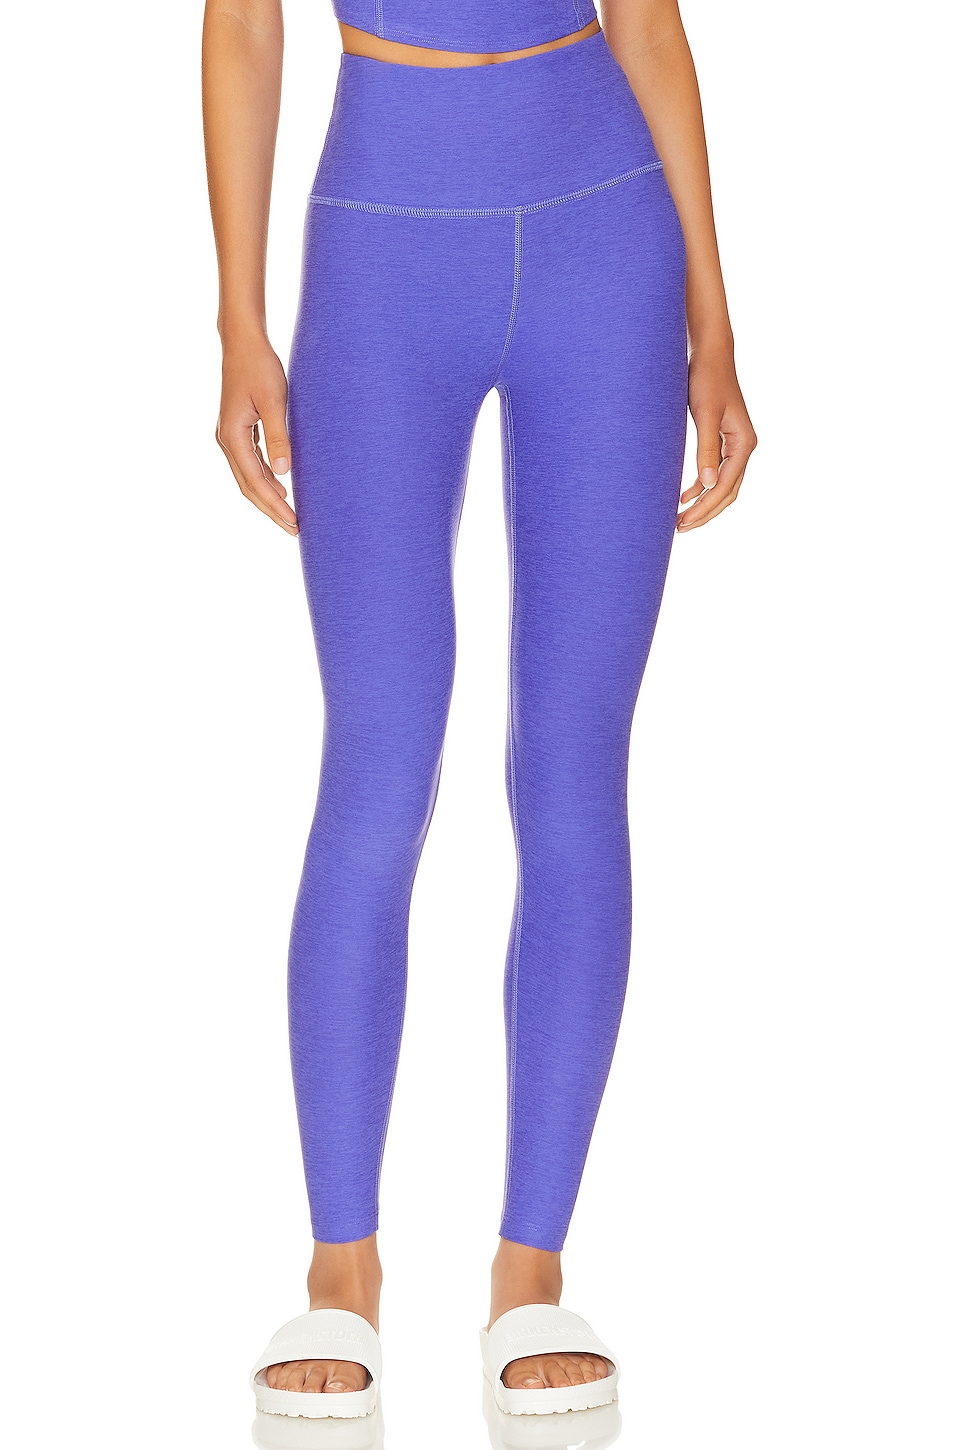 Beyond Yoga Caught In The Midi High Waisted Legging in Purple Magenta  Heather